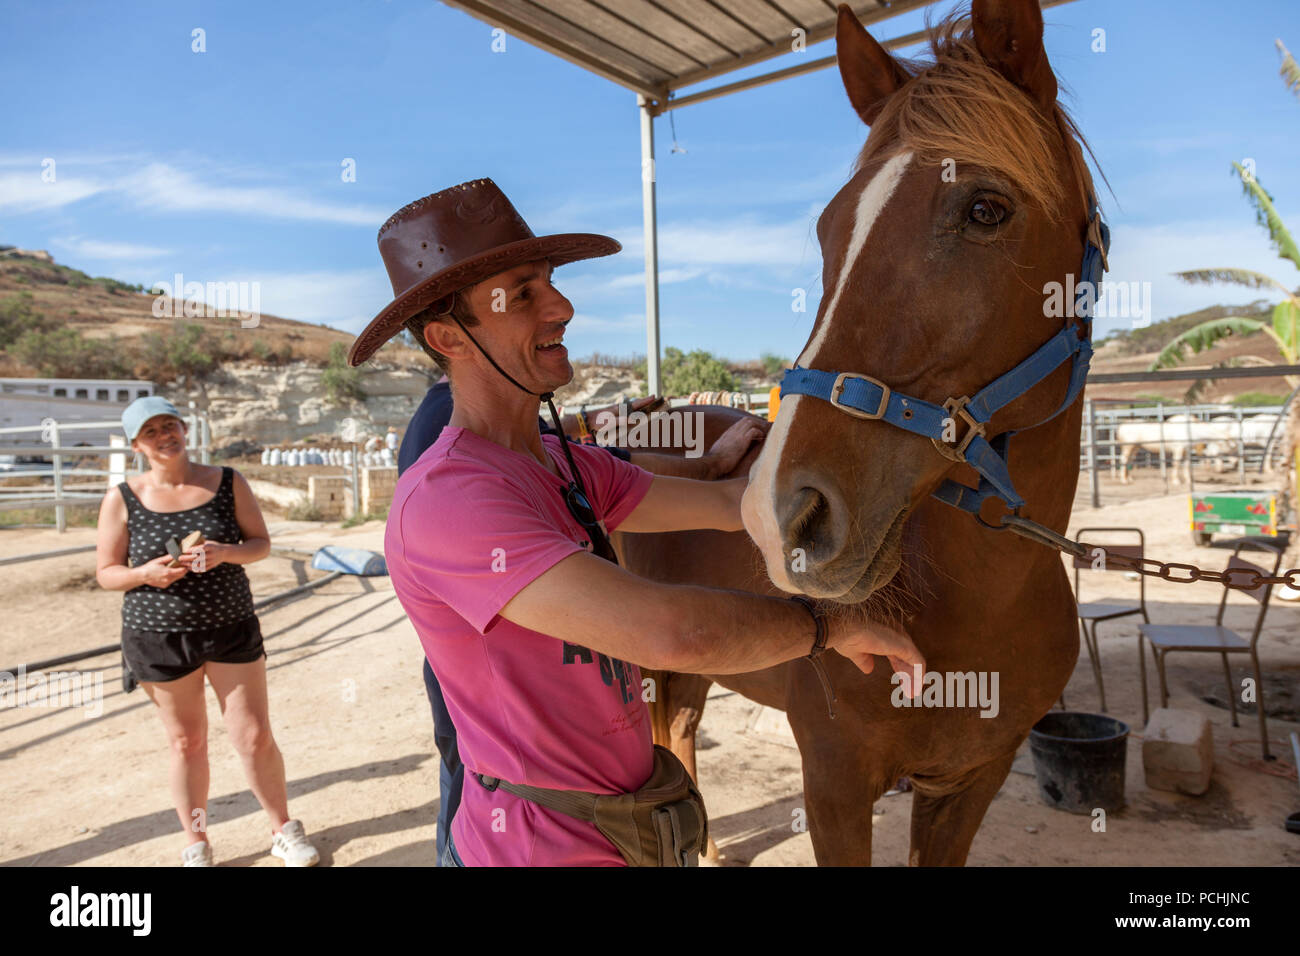 Visitors at a horse-farm interact with a horse. Stock Photo